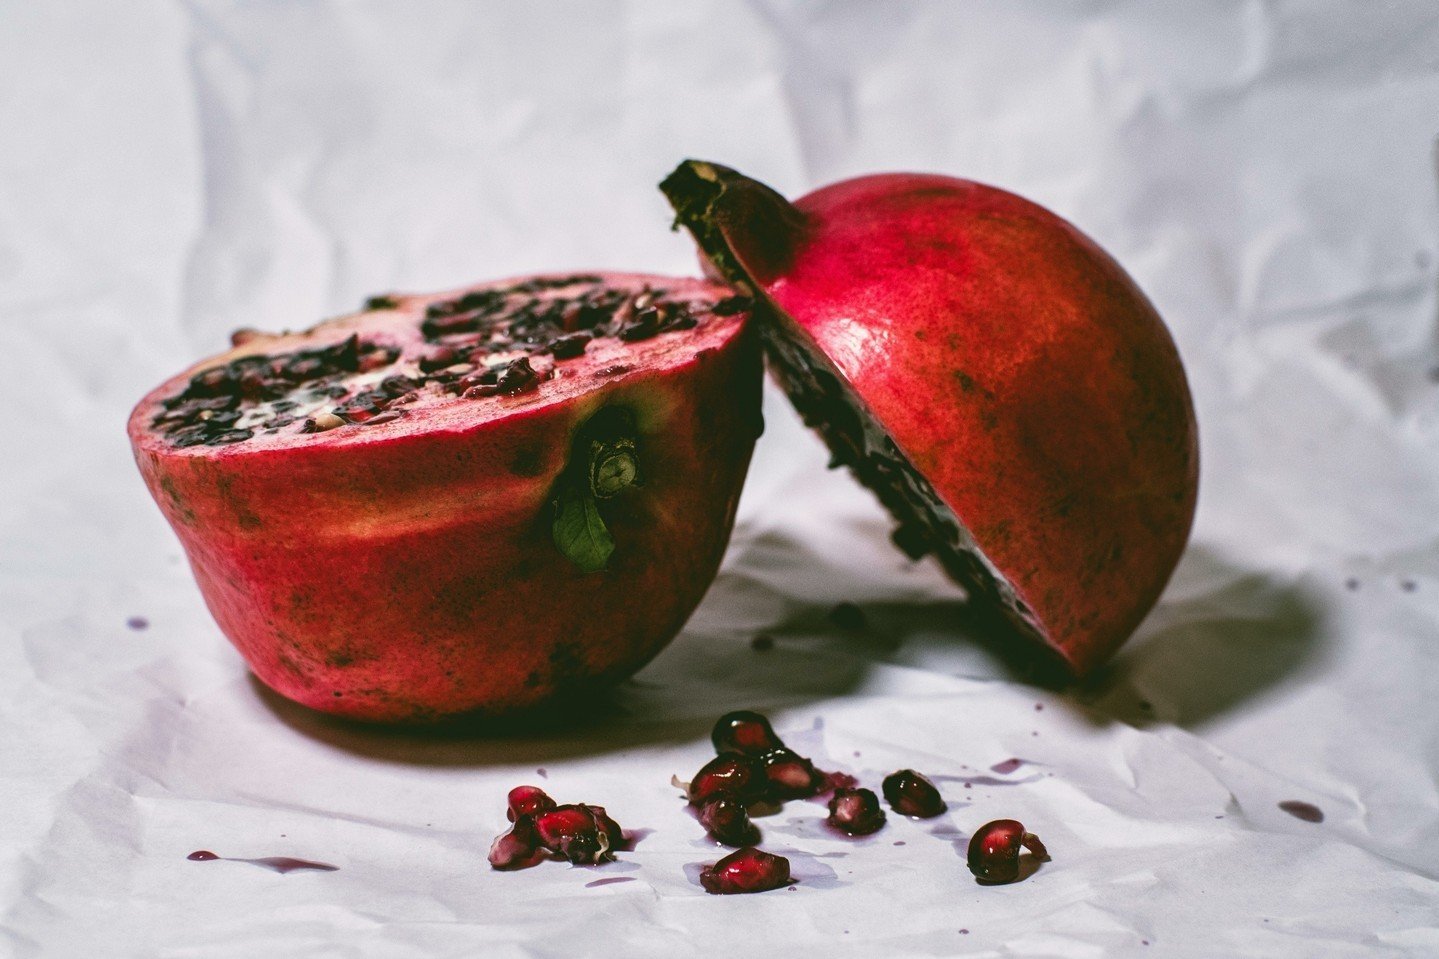 Pomegranates have been used for centuries to treat a variety of conditions. This delicious fruit is not only beneficial for your health, but it can also do wonders for your skin!

Pomegranate is rich in antioxidants that help protect your skin from e